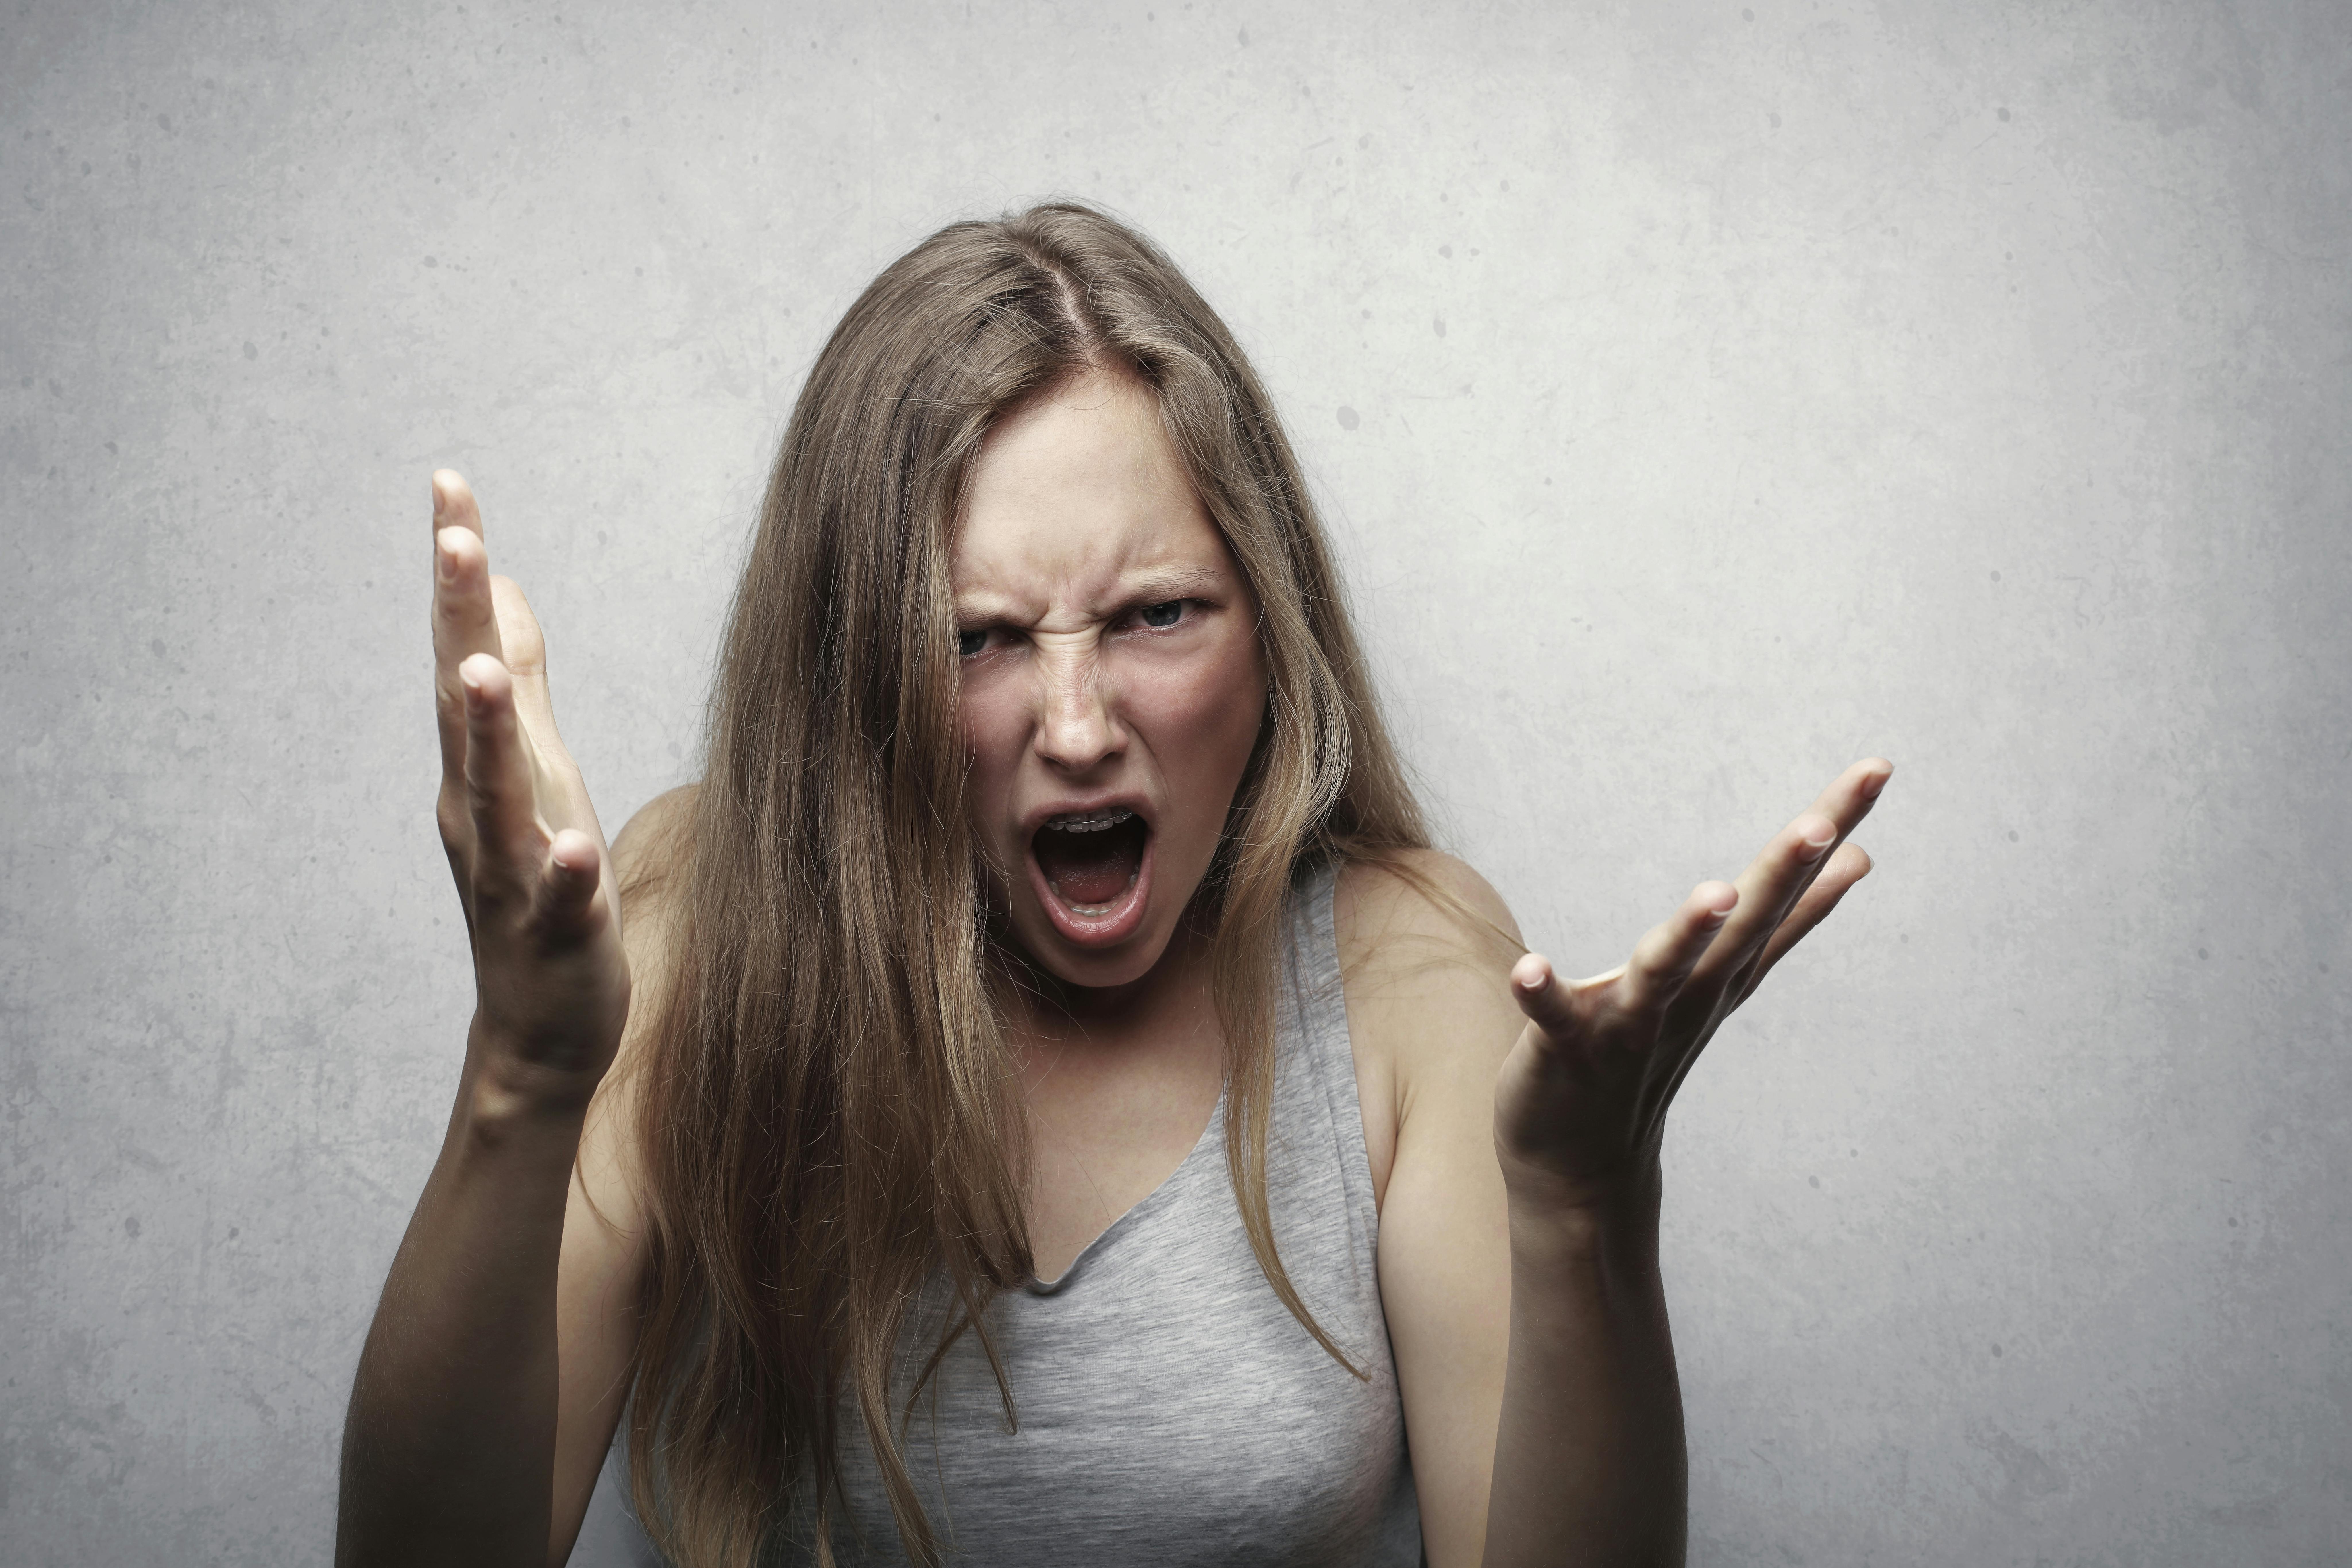 An angry woman with her hands in the air | Source: Pexels